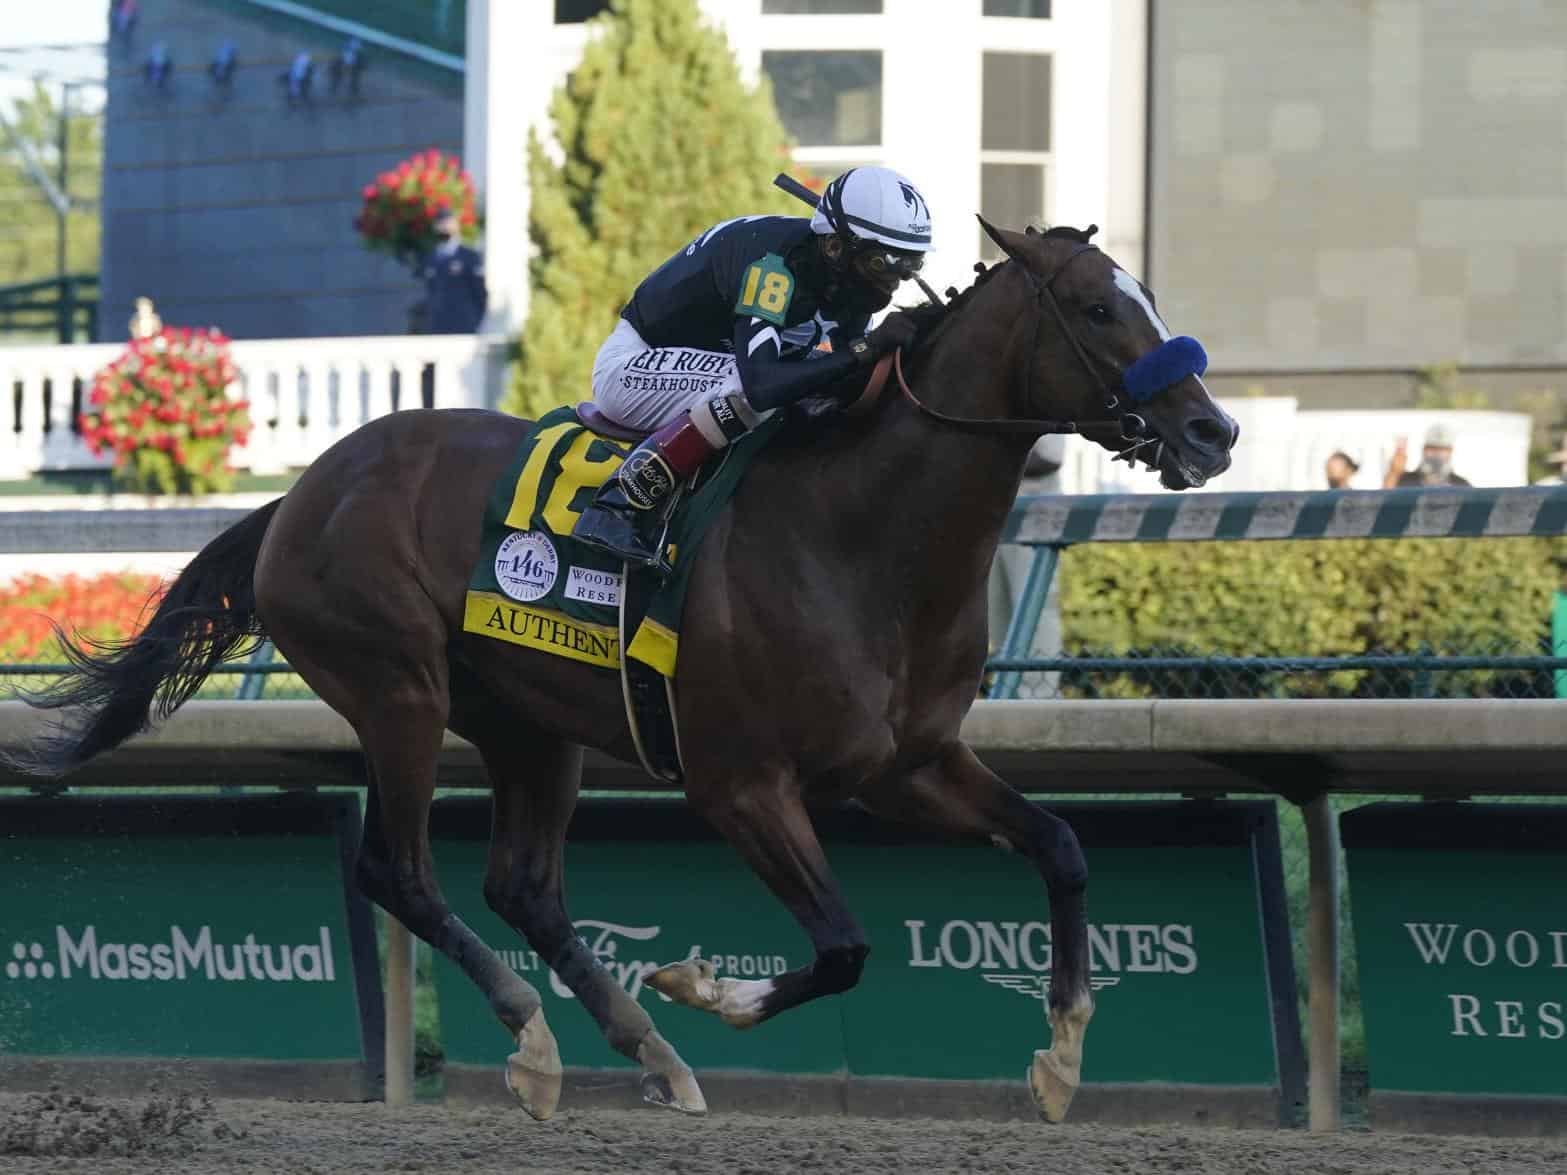 To Win The Kentucky Derby: Authentic Upsets Tiz The Law